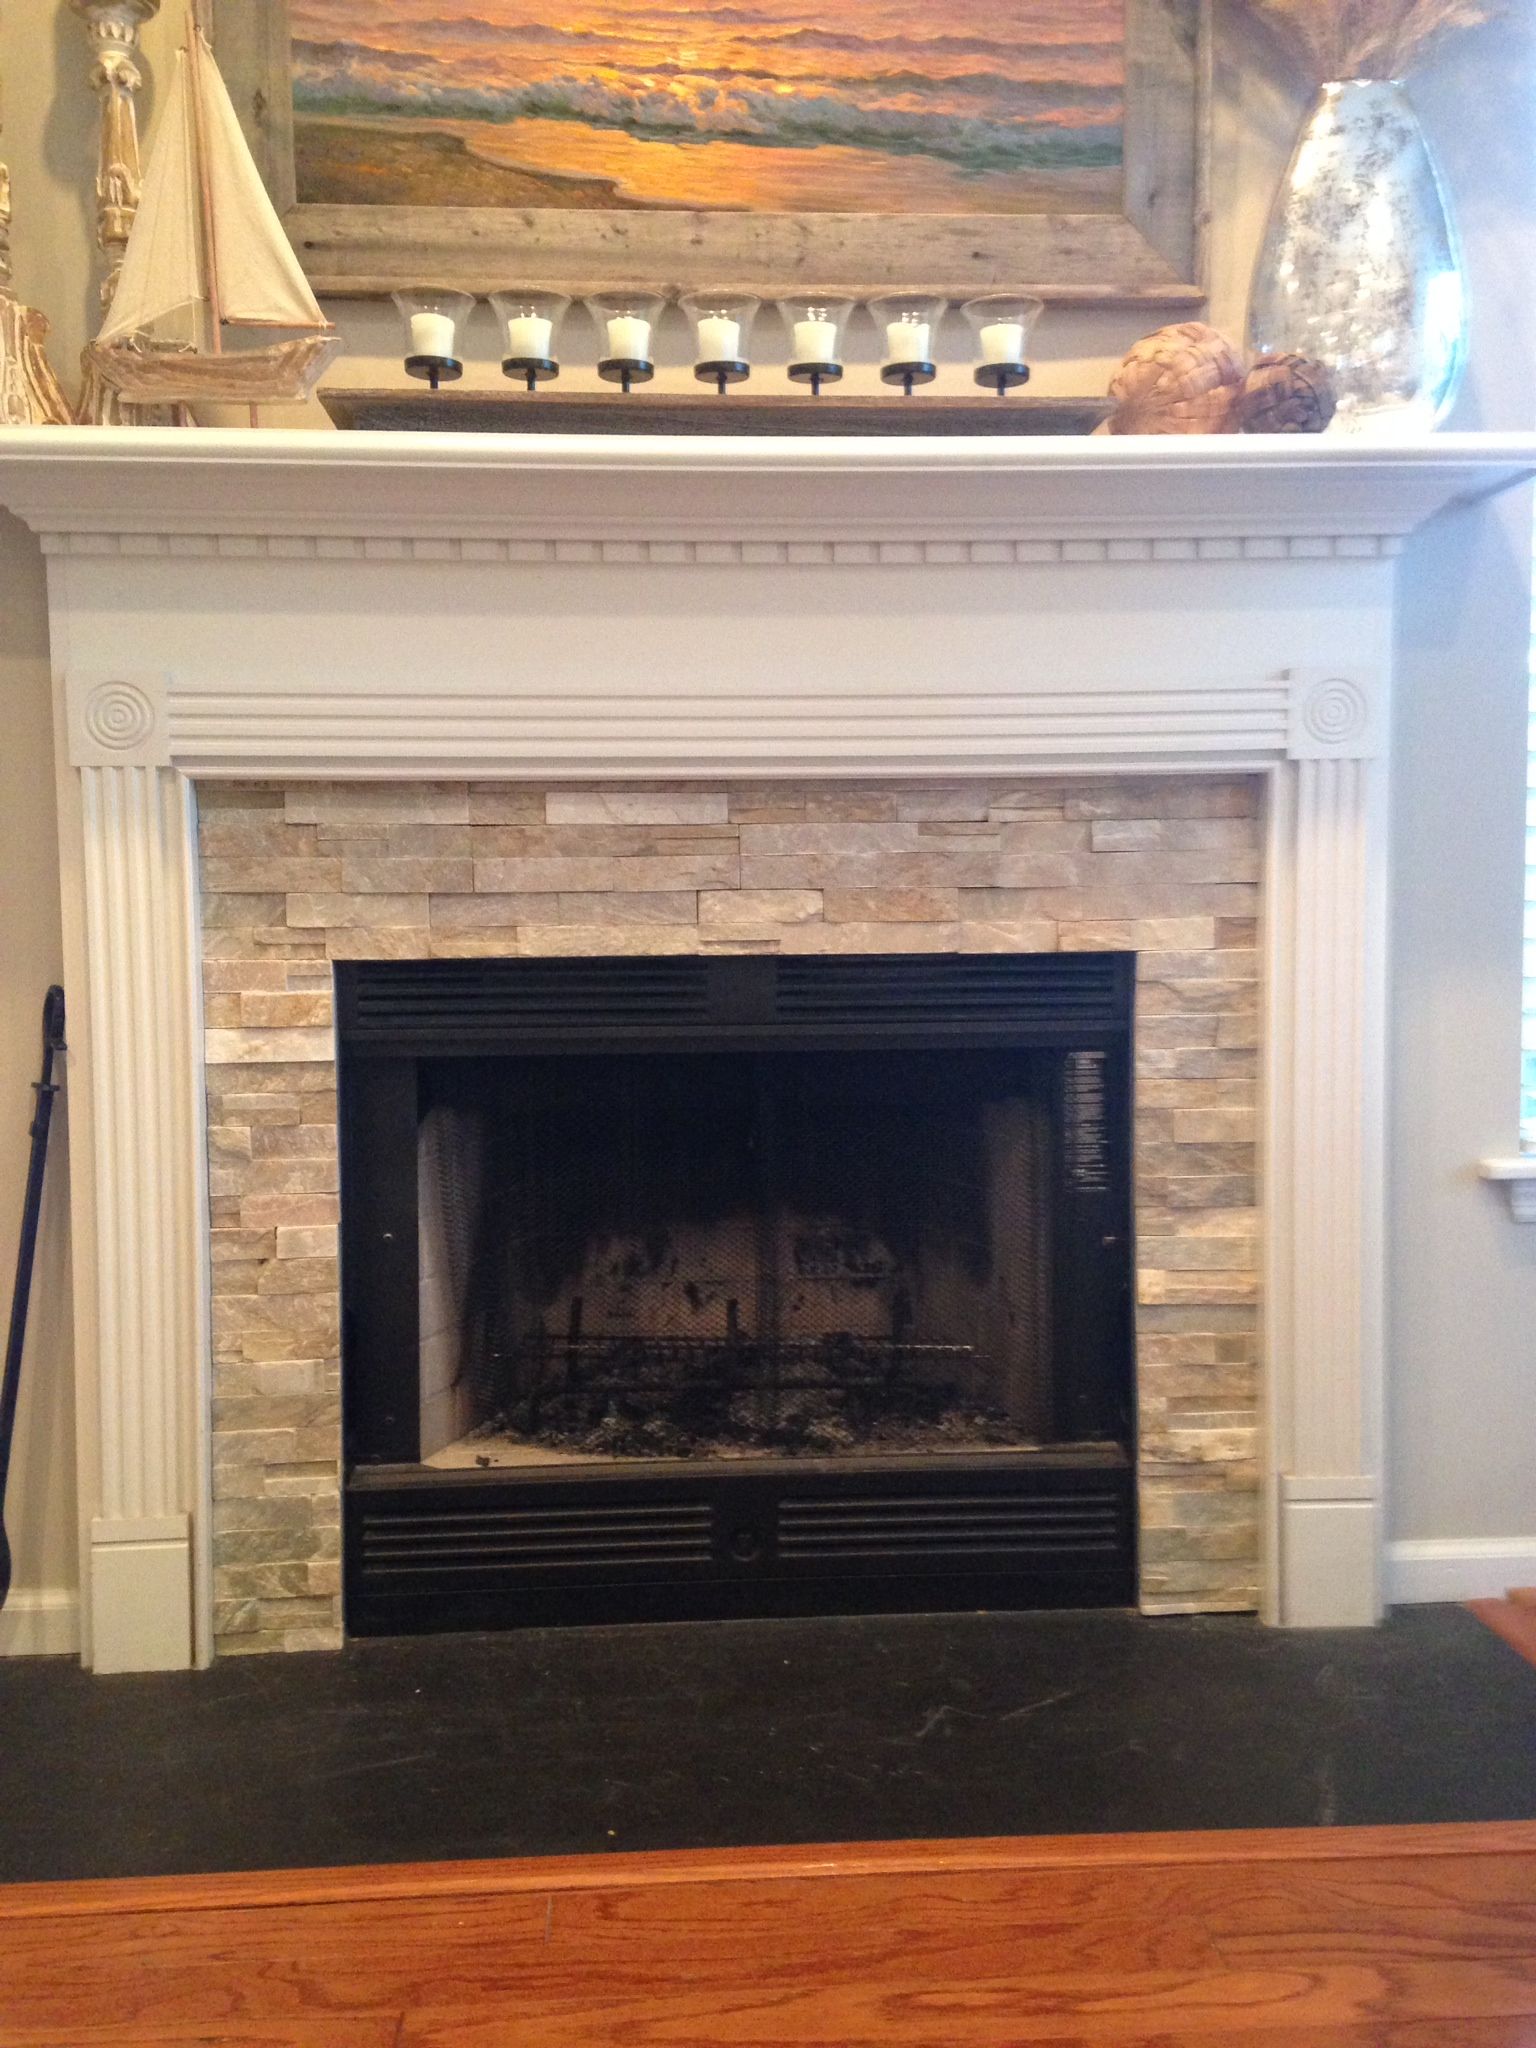 Show Me Fireplaces Awesome Fireplace Idea Mantel Wainscoting Design Craftsman